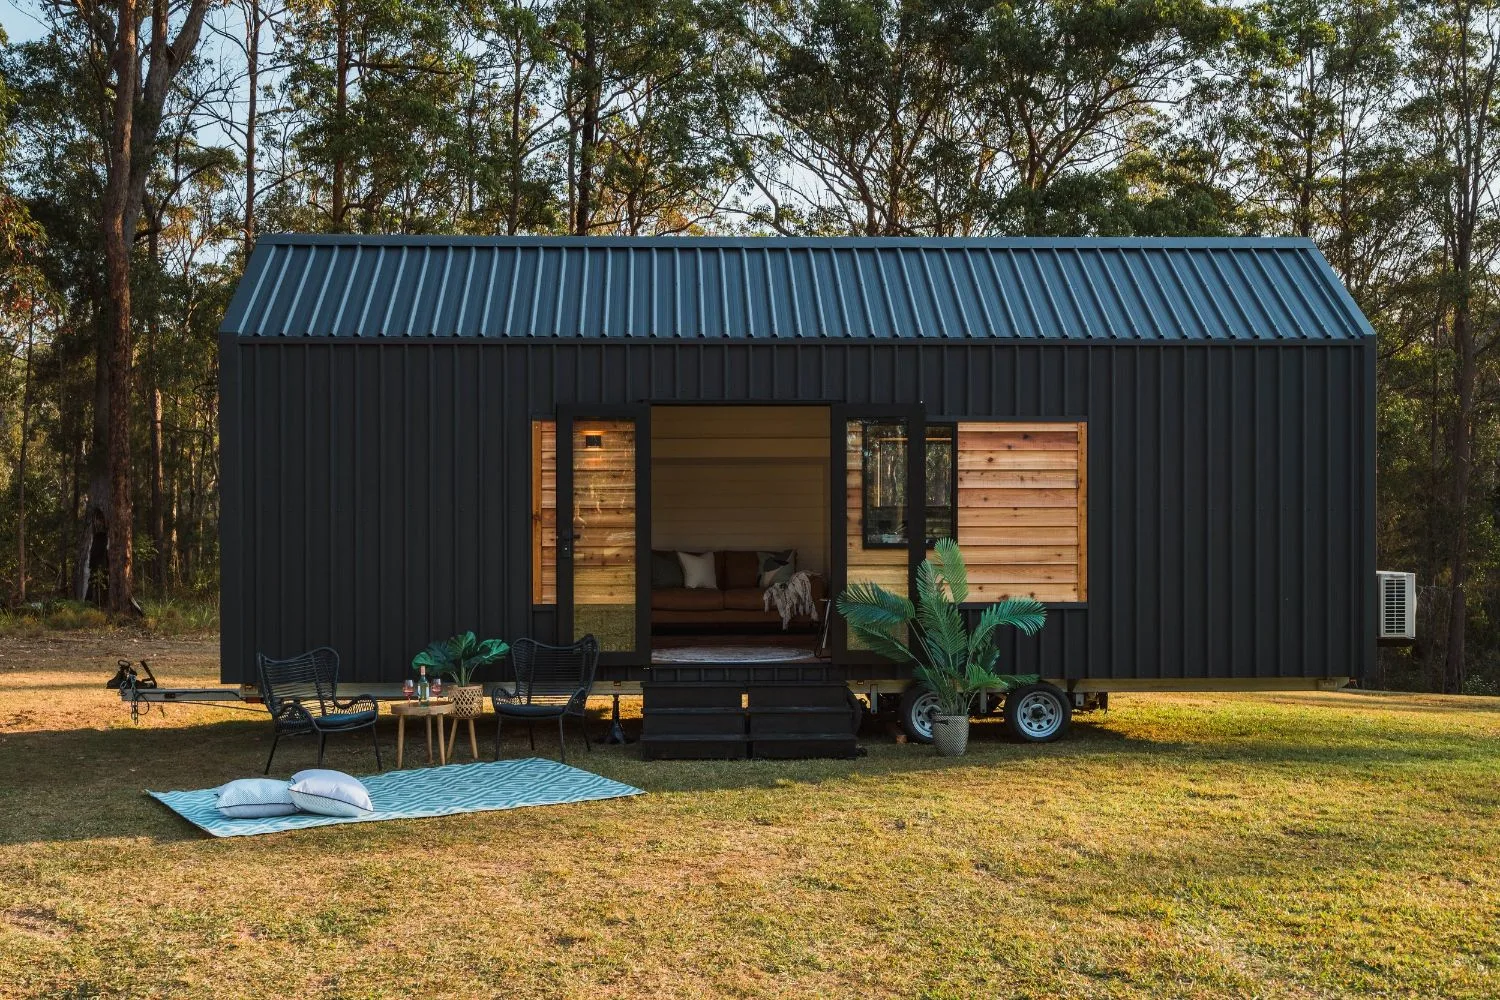 Matching Siding and Roof - Settler by Häuslein Tiny House Co